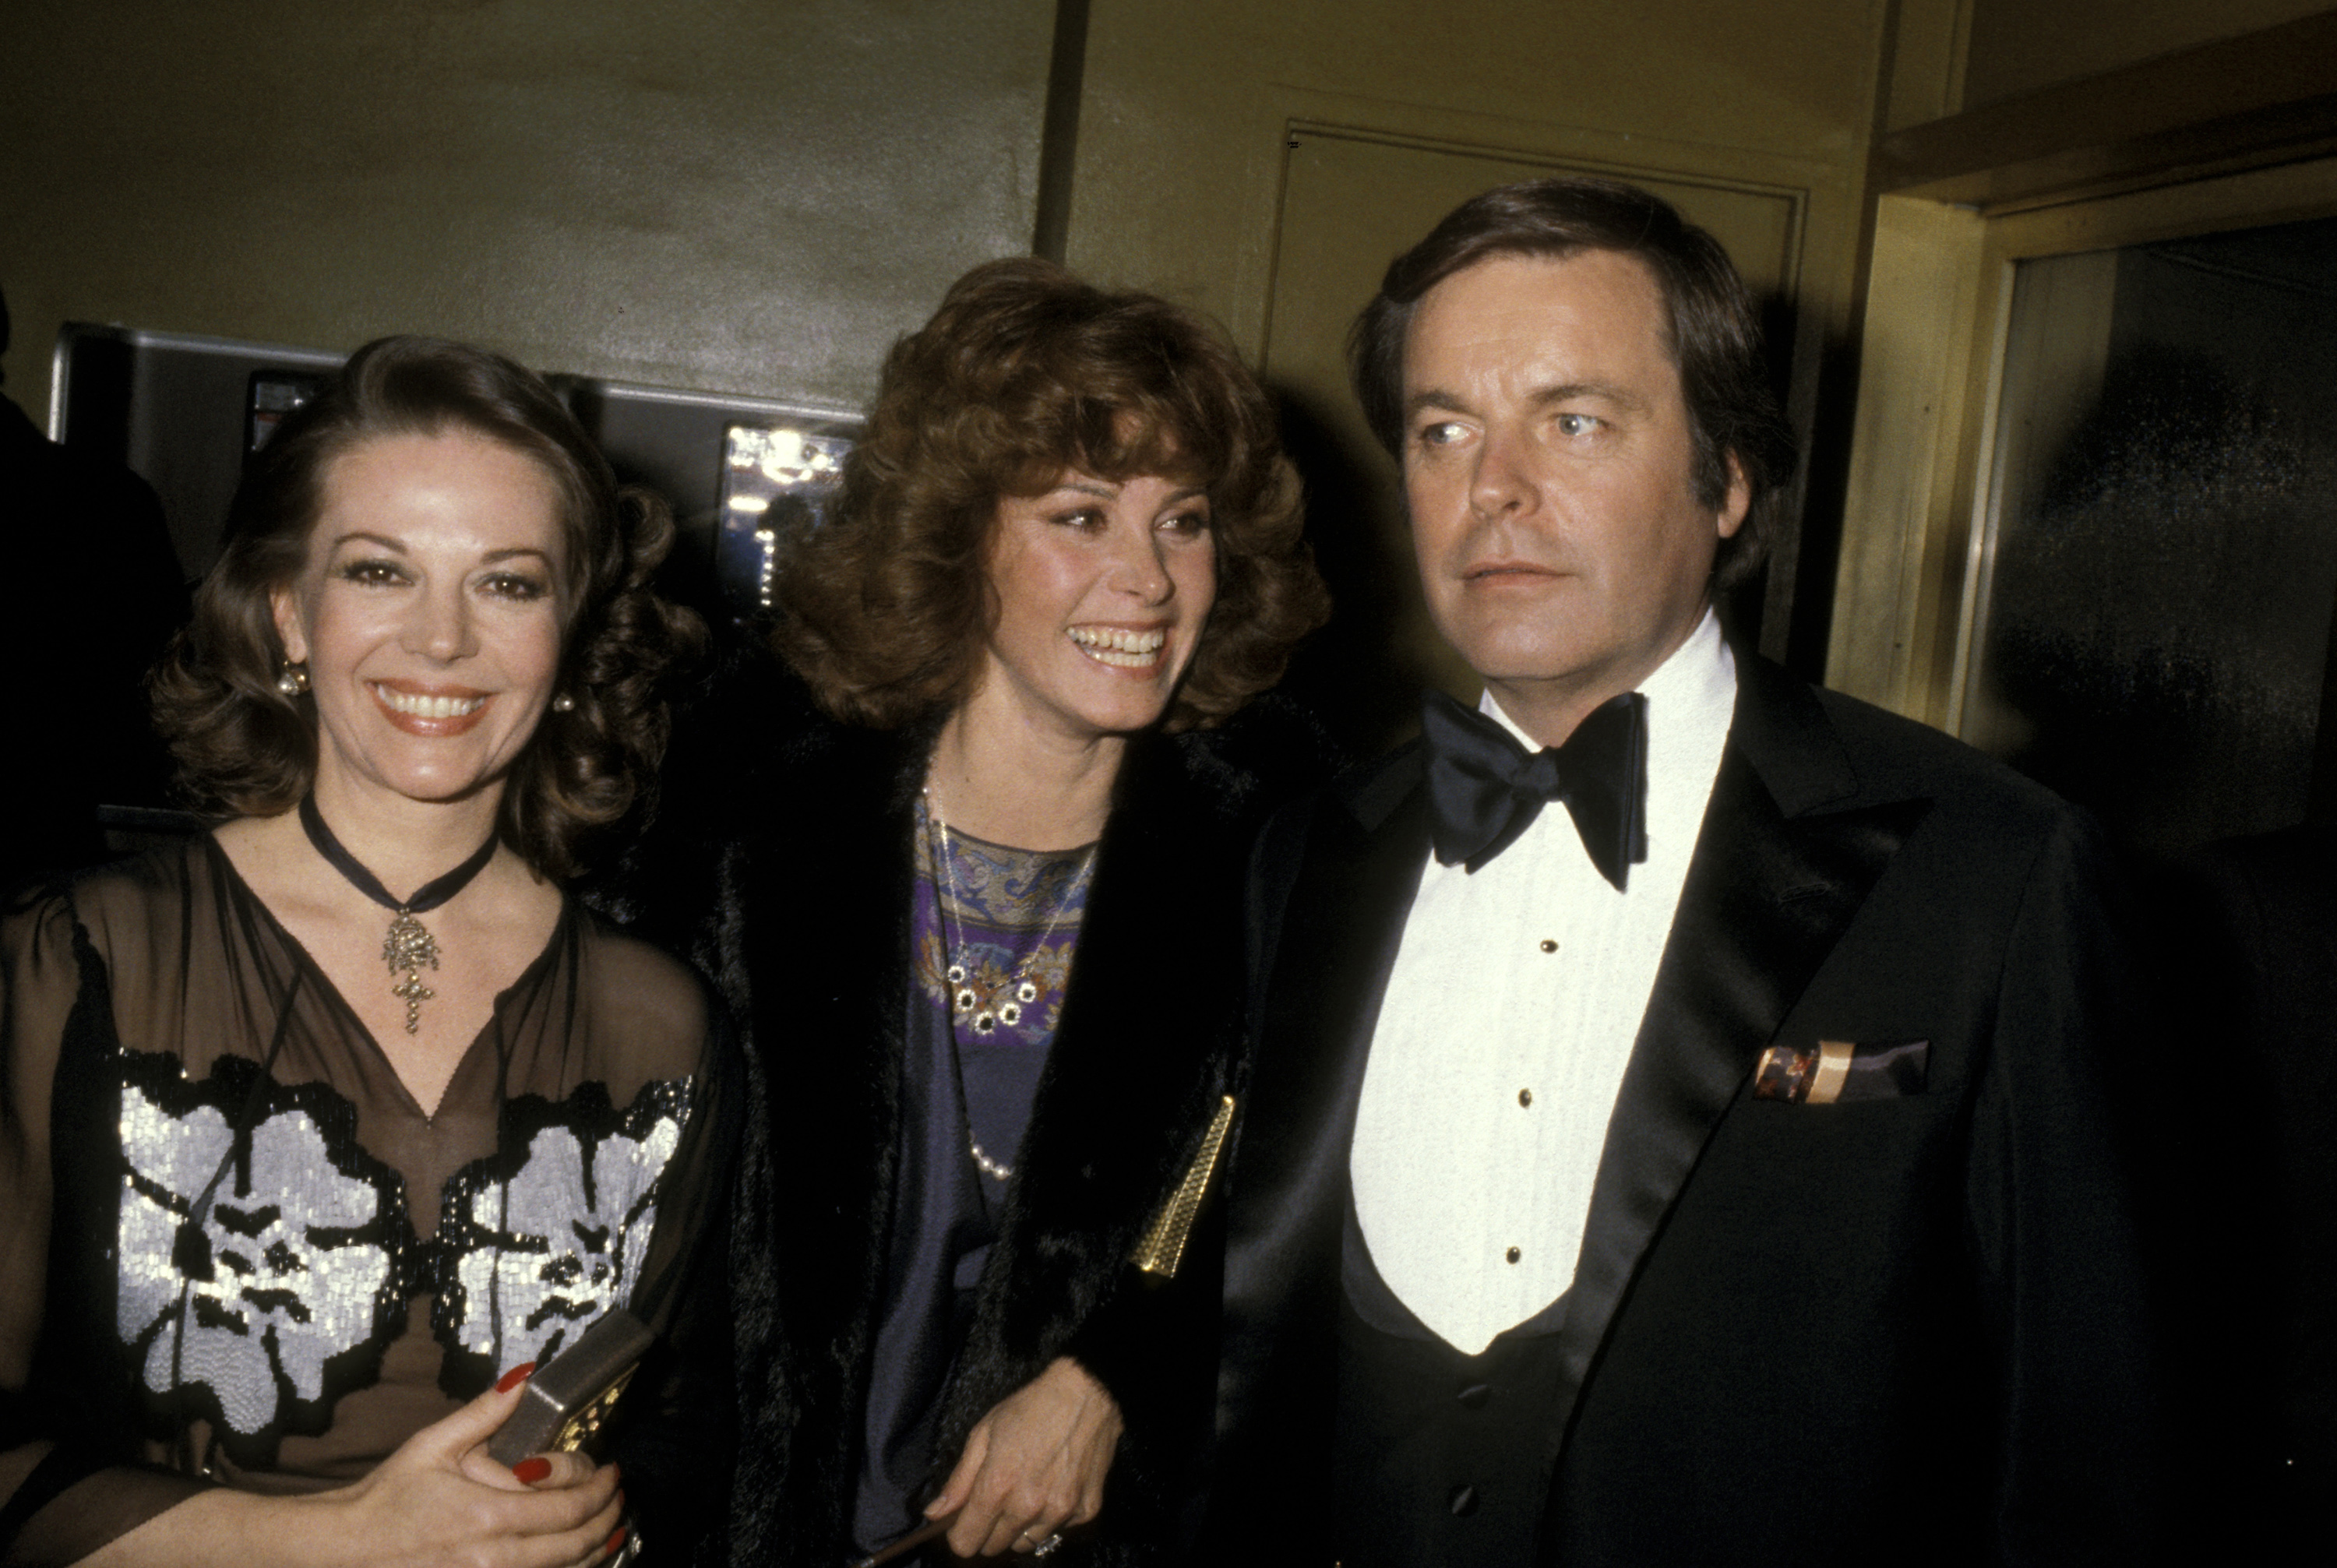 Natalie Wood, Stefanie Powers and Robert Wagner during 6th Annual People's Choice Awards at Hollywood Palladium in Hollywood, California, United States. | Source: Getty Images